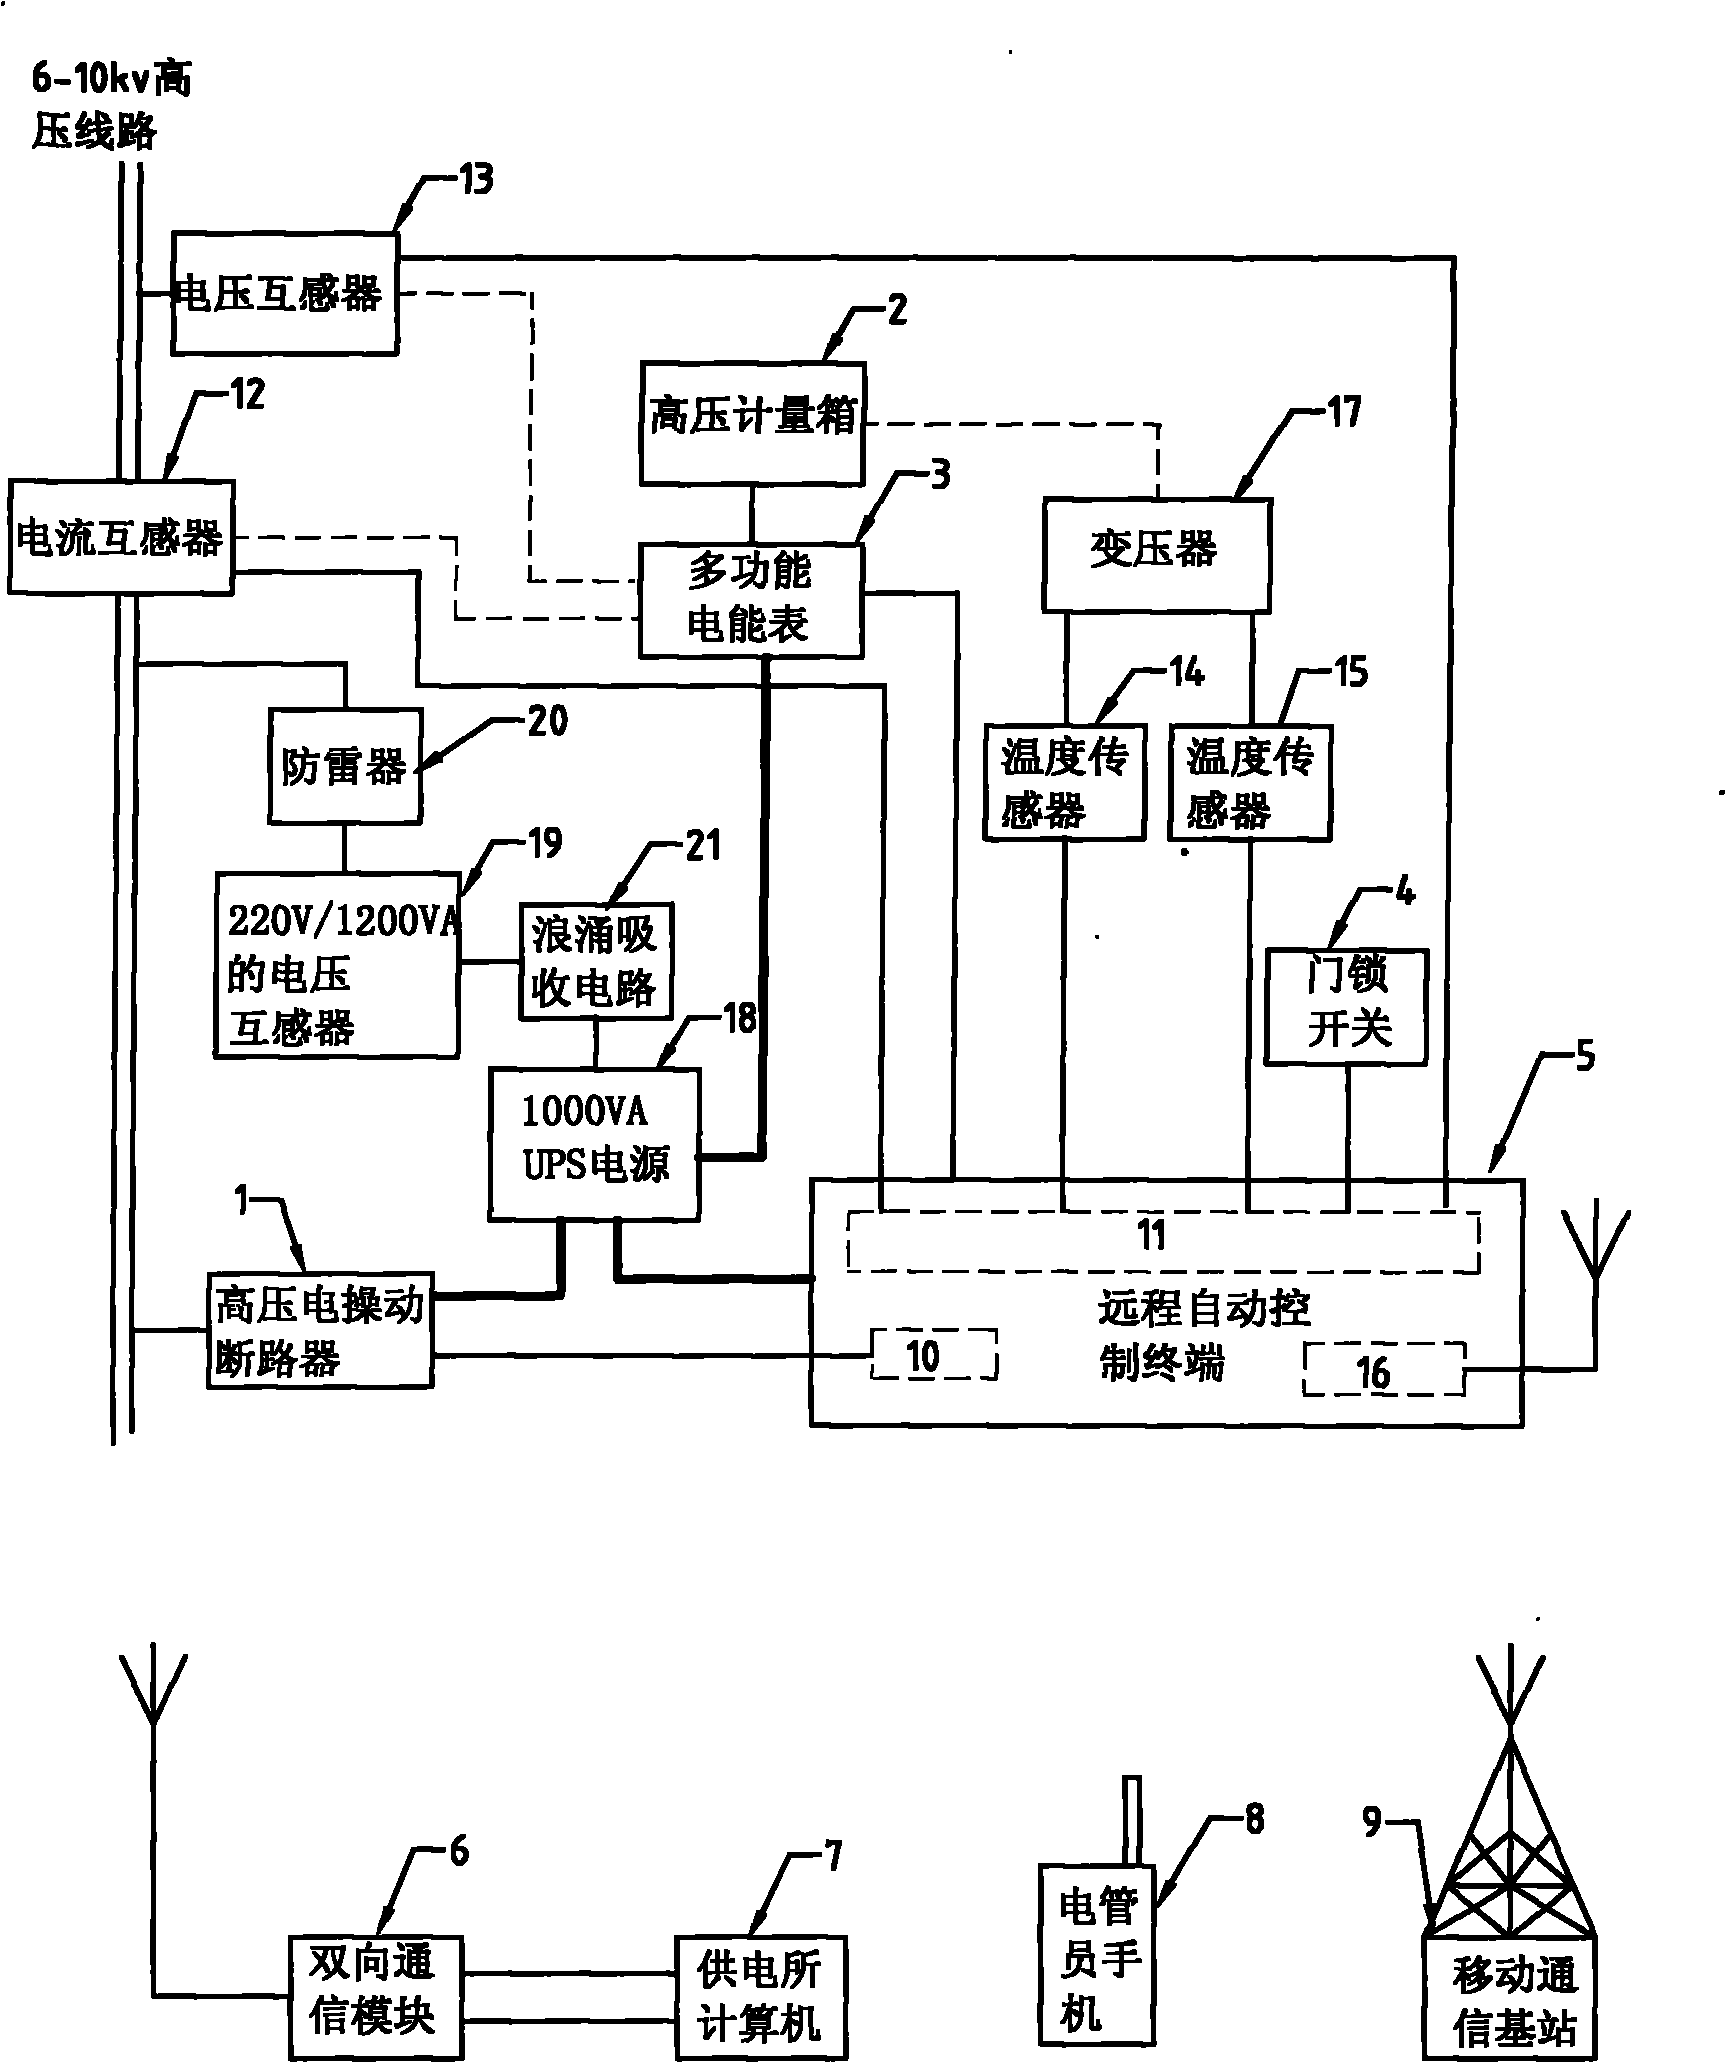 Intelligent monitoring device for high-voltage electrical energy